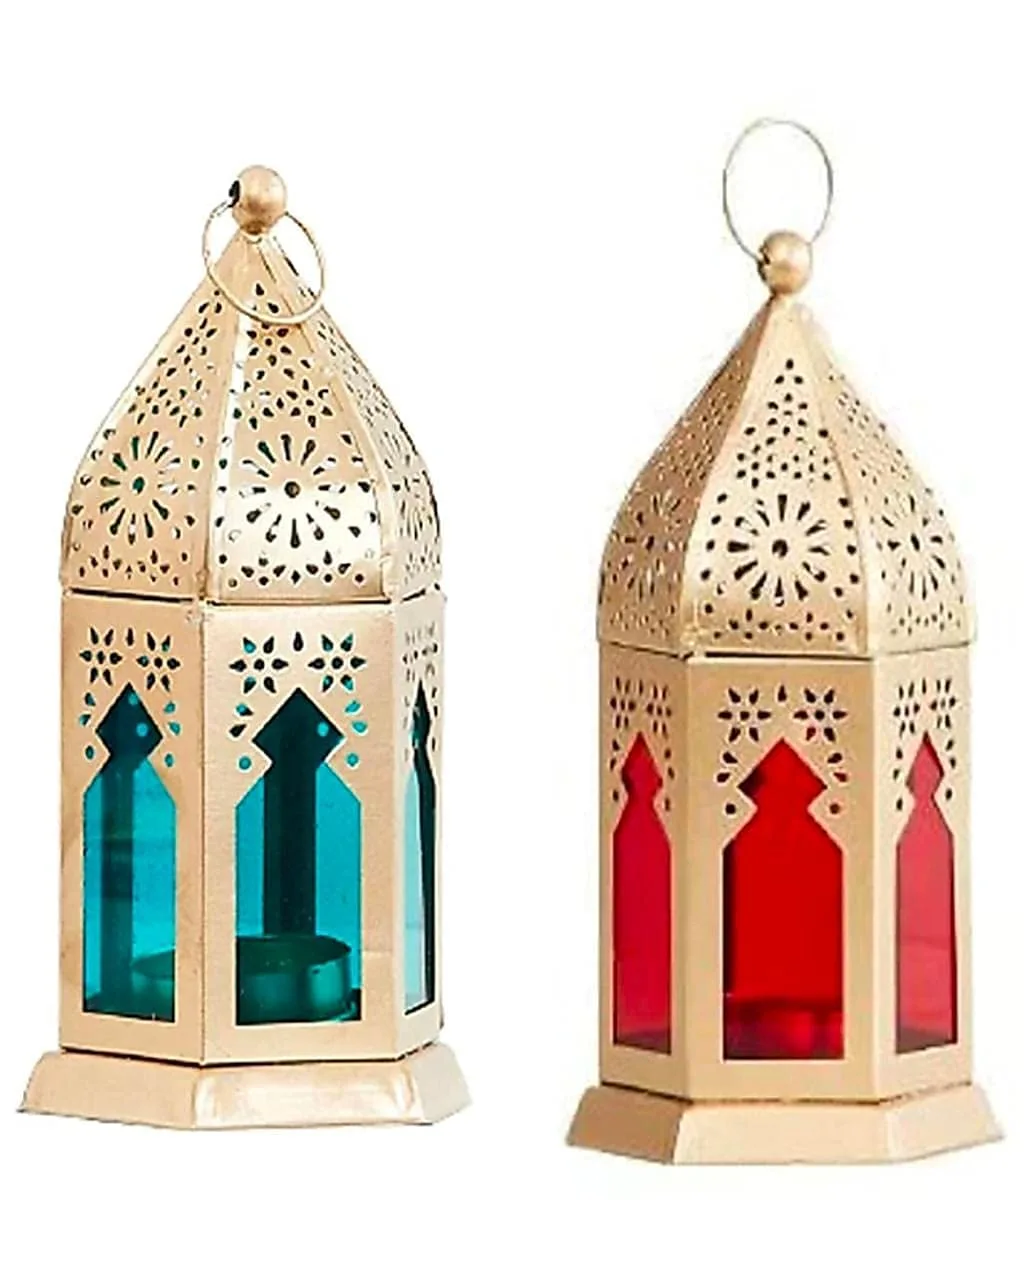 A close-up view of a Moroccan lantern lamp with intricate metalwork and vibrant colors.